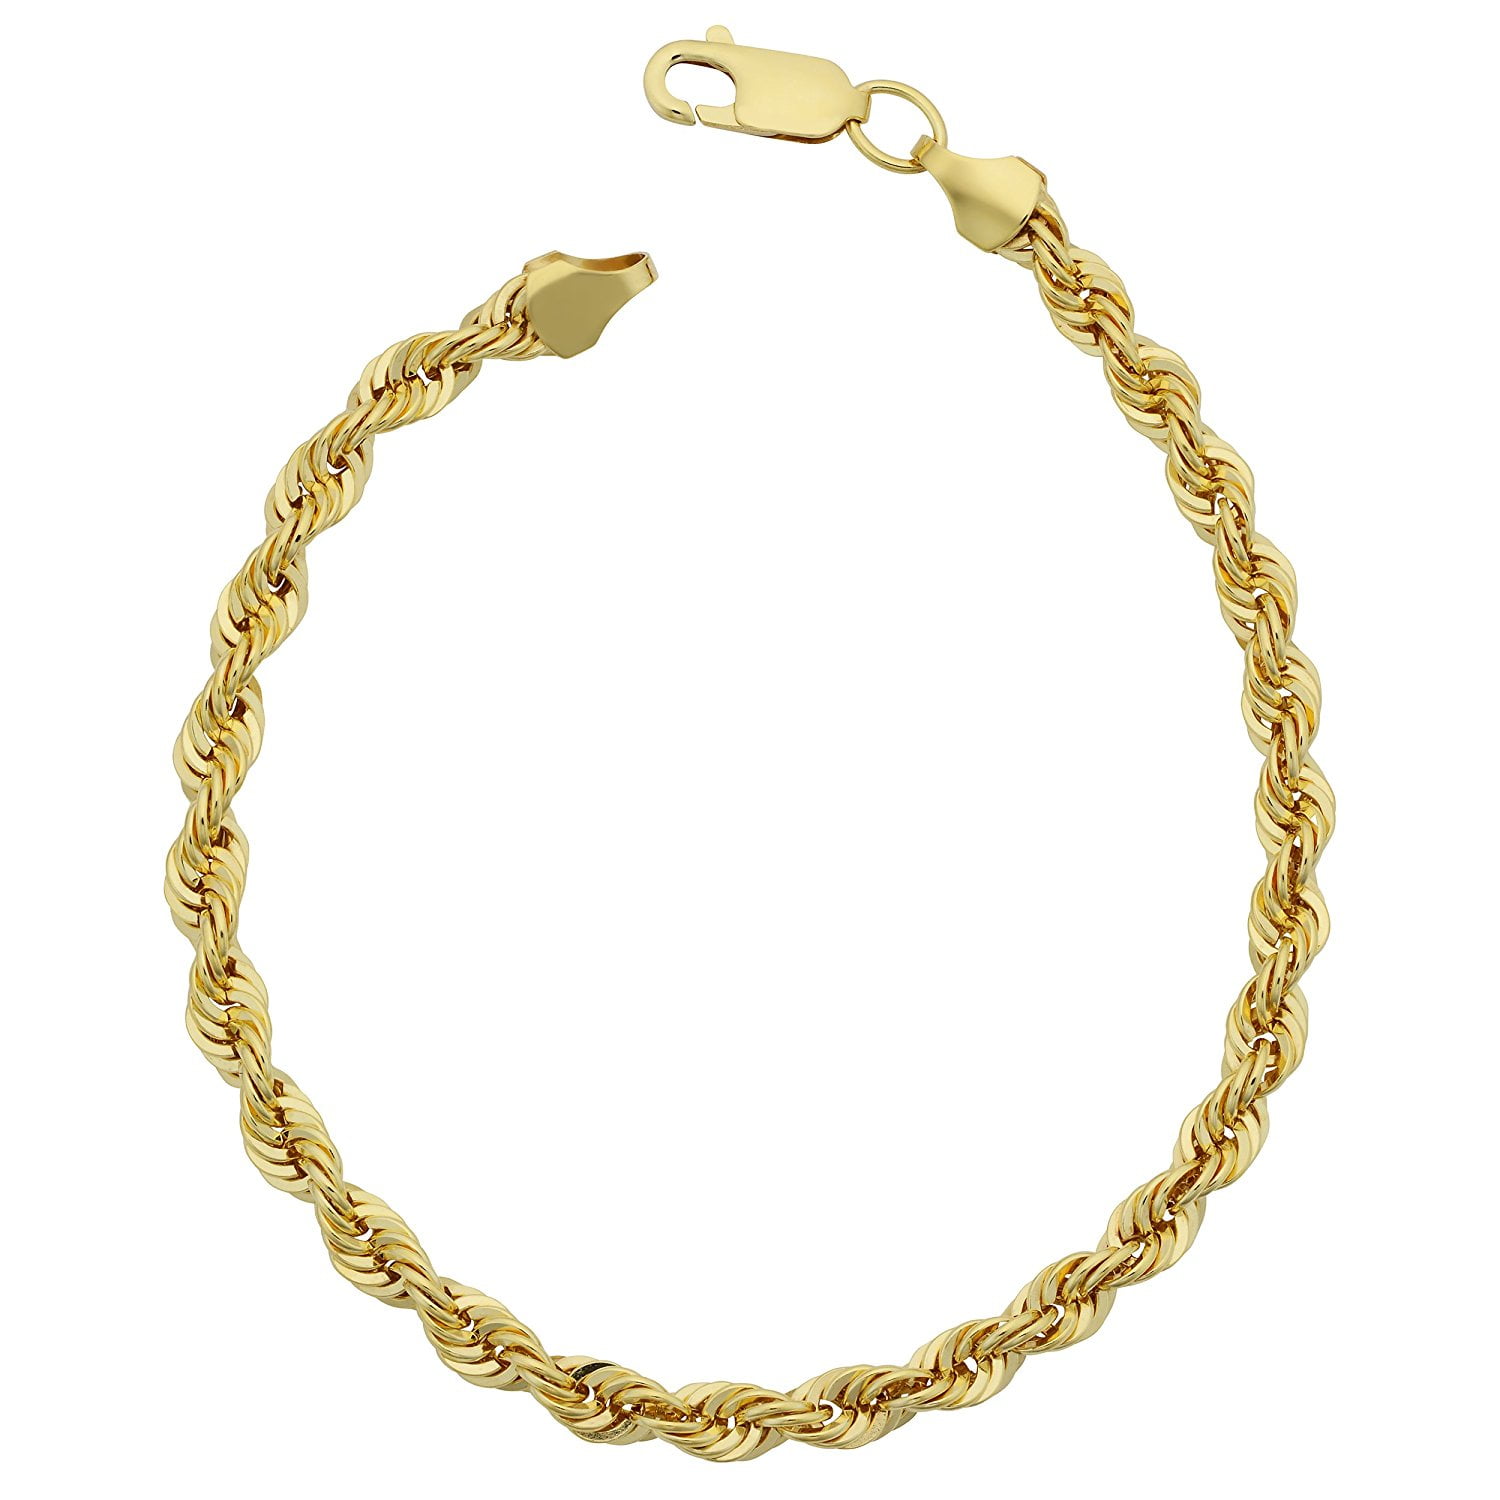 Jewelry Affairs - 14K Yellow Gold Filled Solid Rope Chain Bracelet, 4 ...